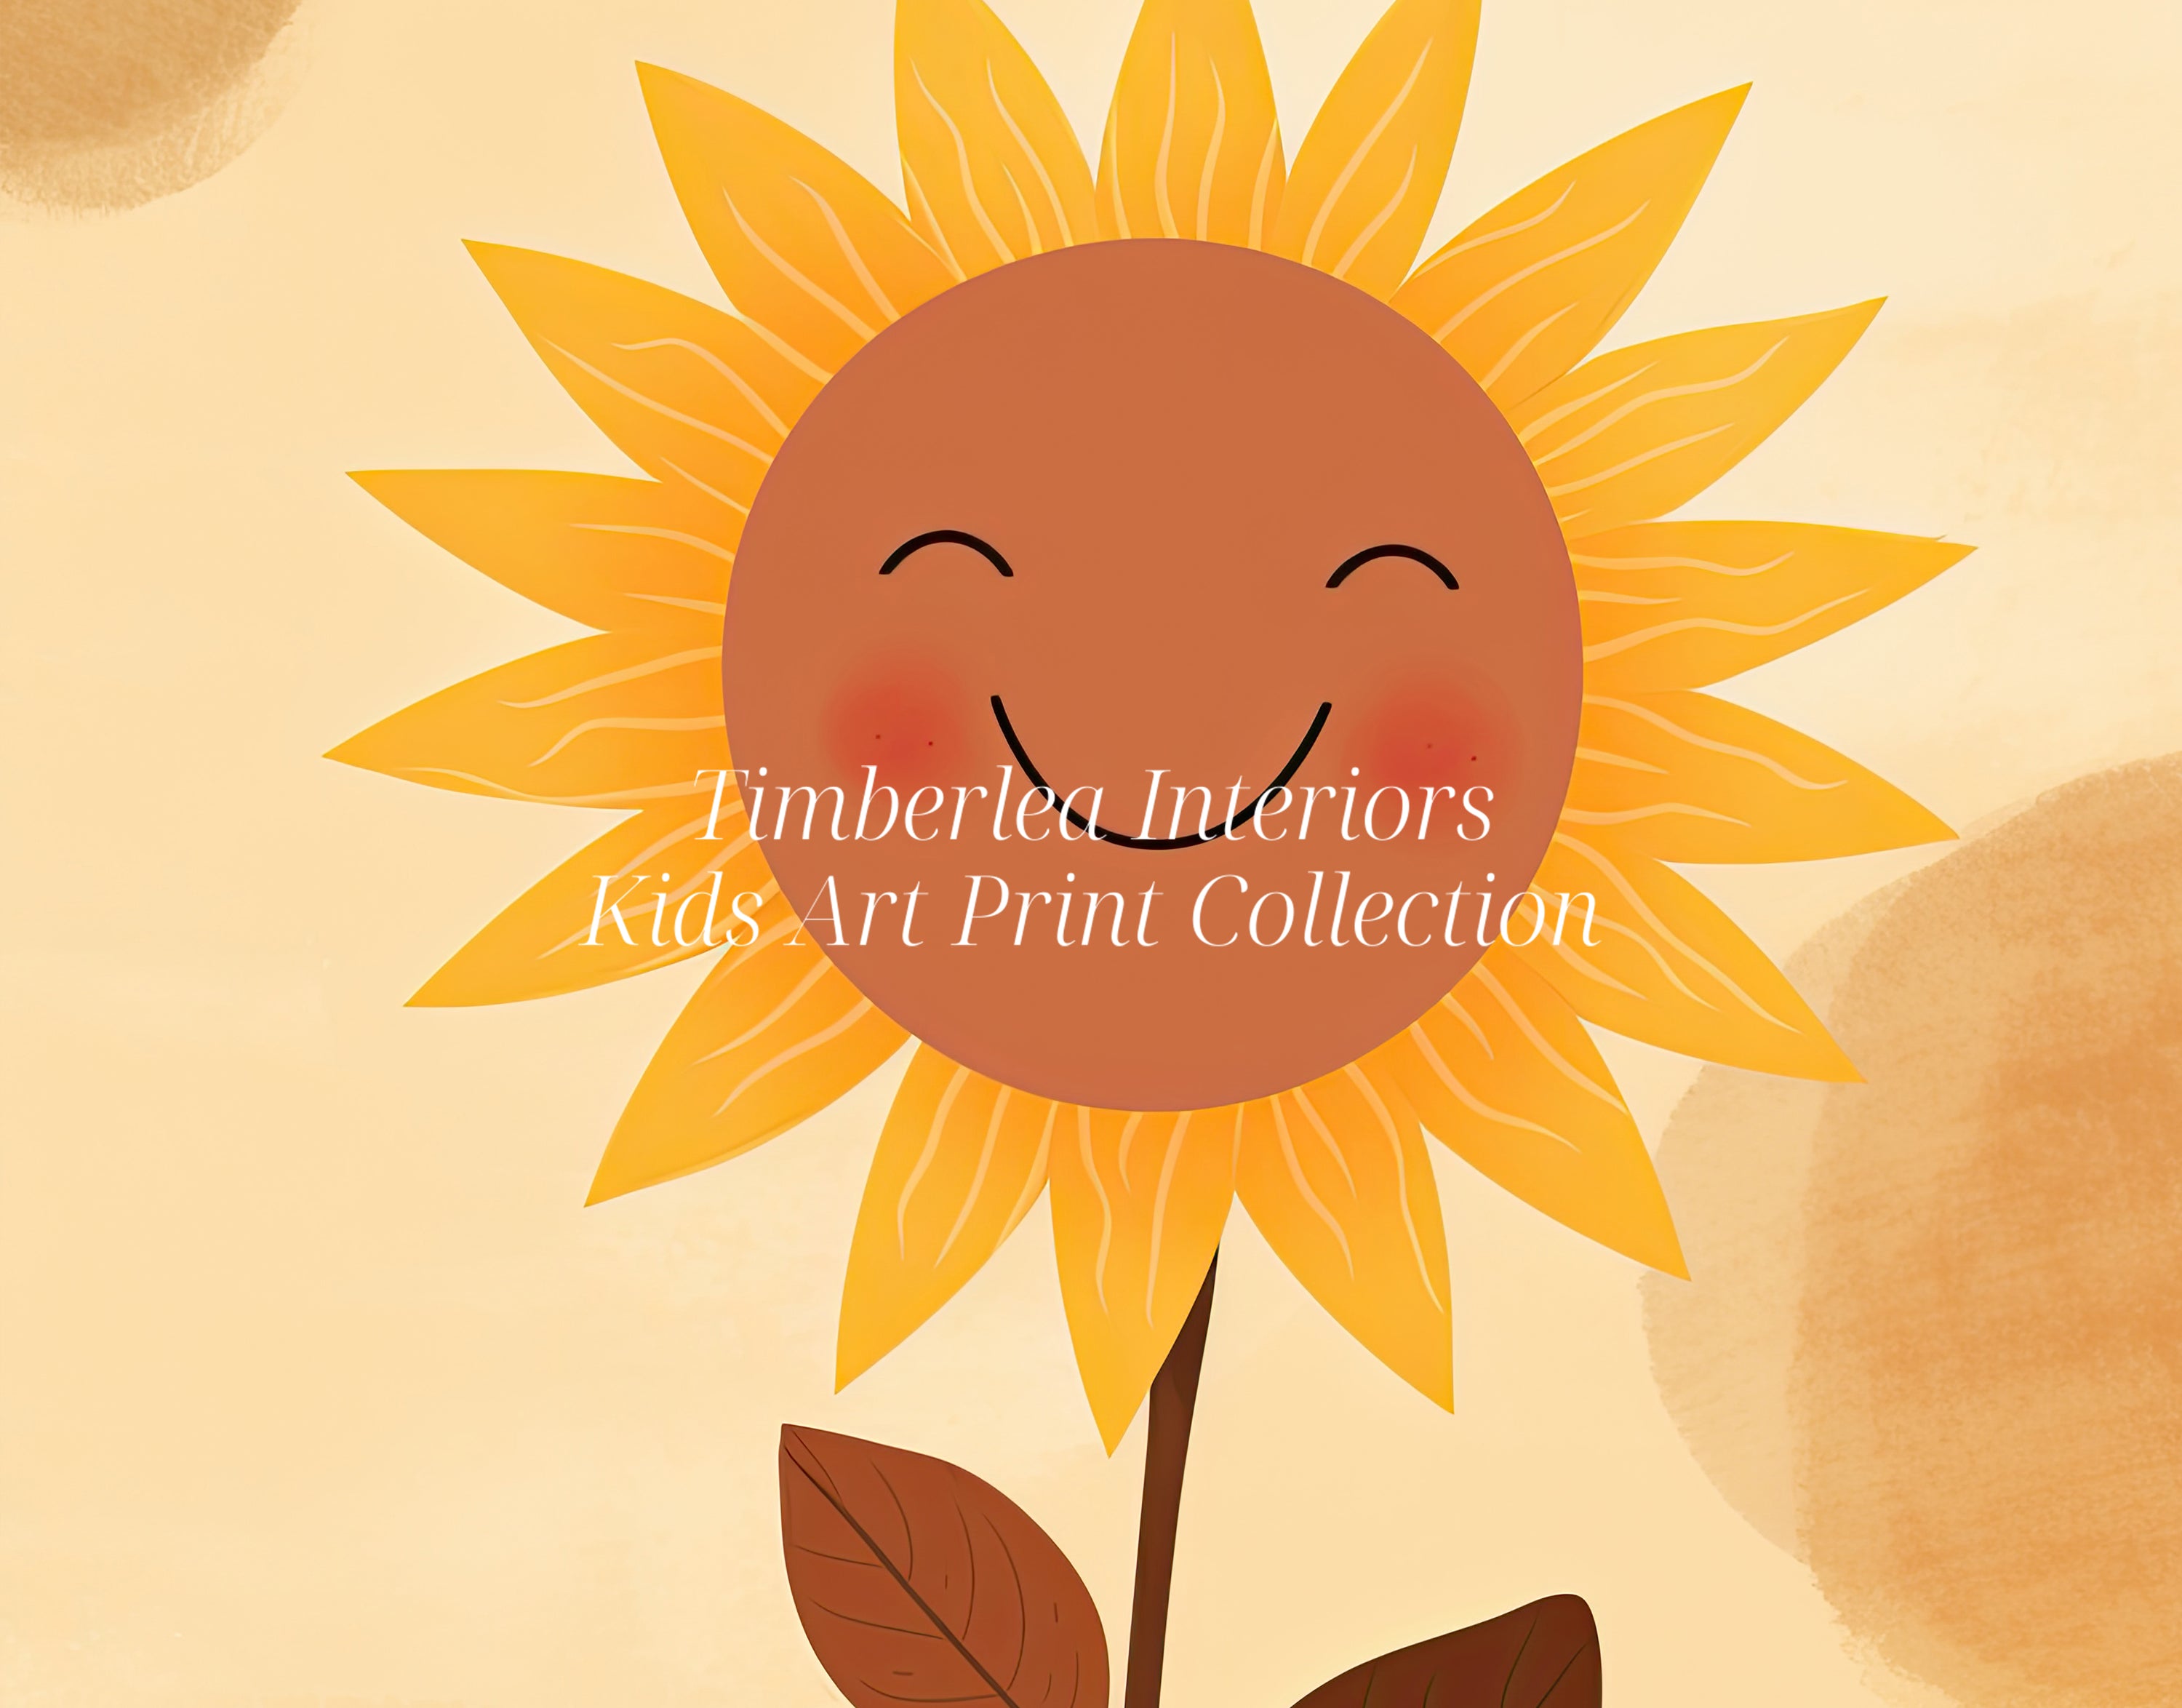 Close-up view of a cheerful art print featuring a smiling sunflower with radiant yellow petals and warm brown leaves on a soft beige background